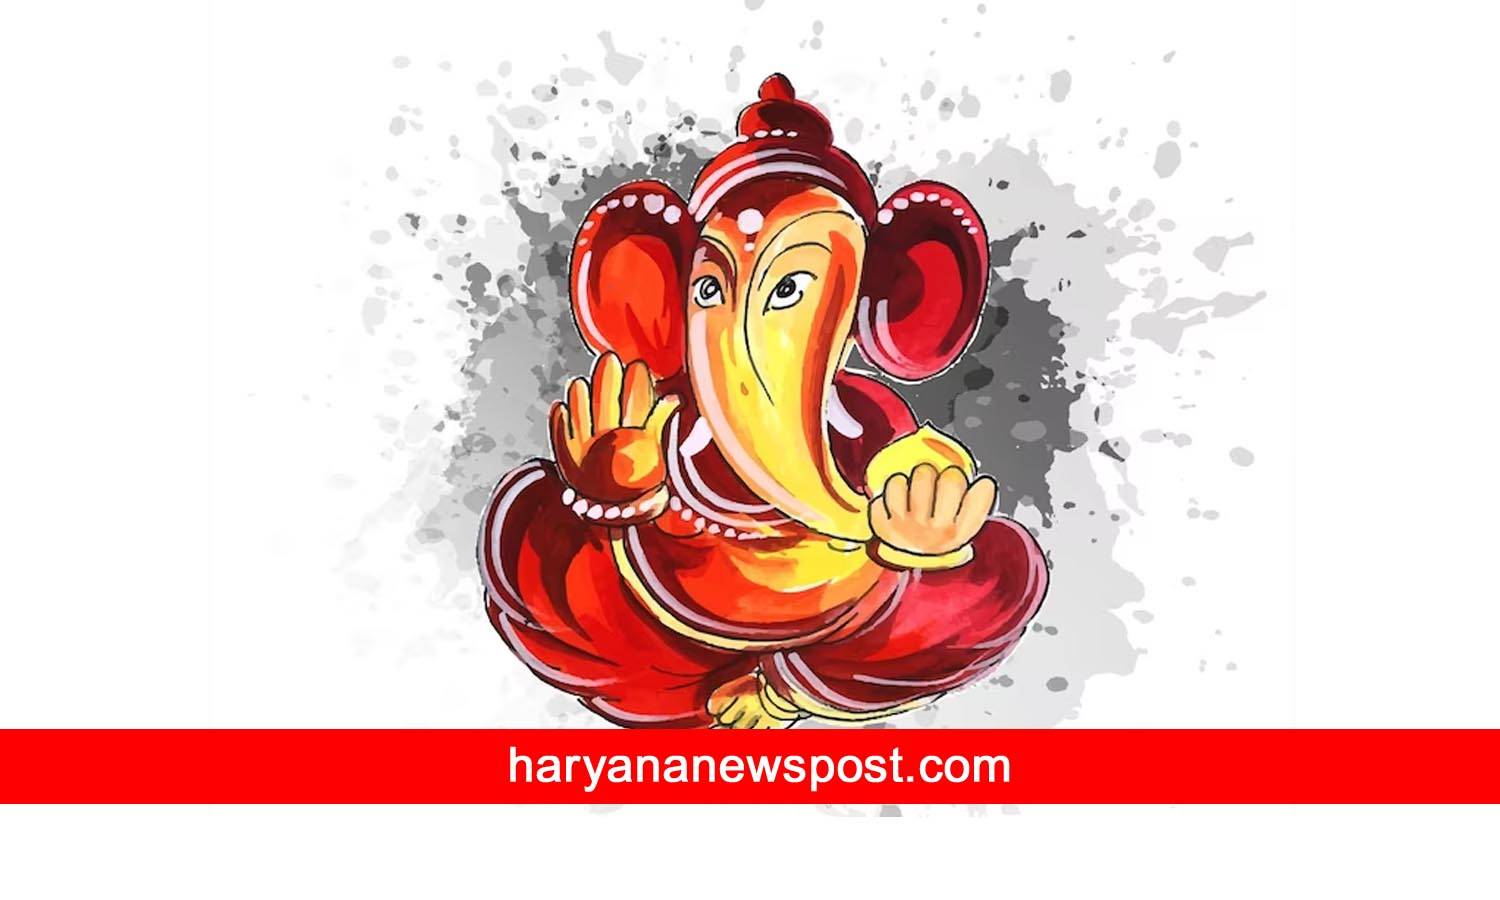 Best Lines for Lord Ganesha – Lines on Ganesh Chaturthi